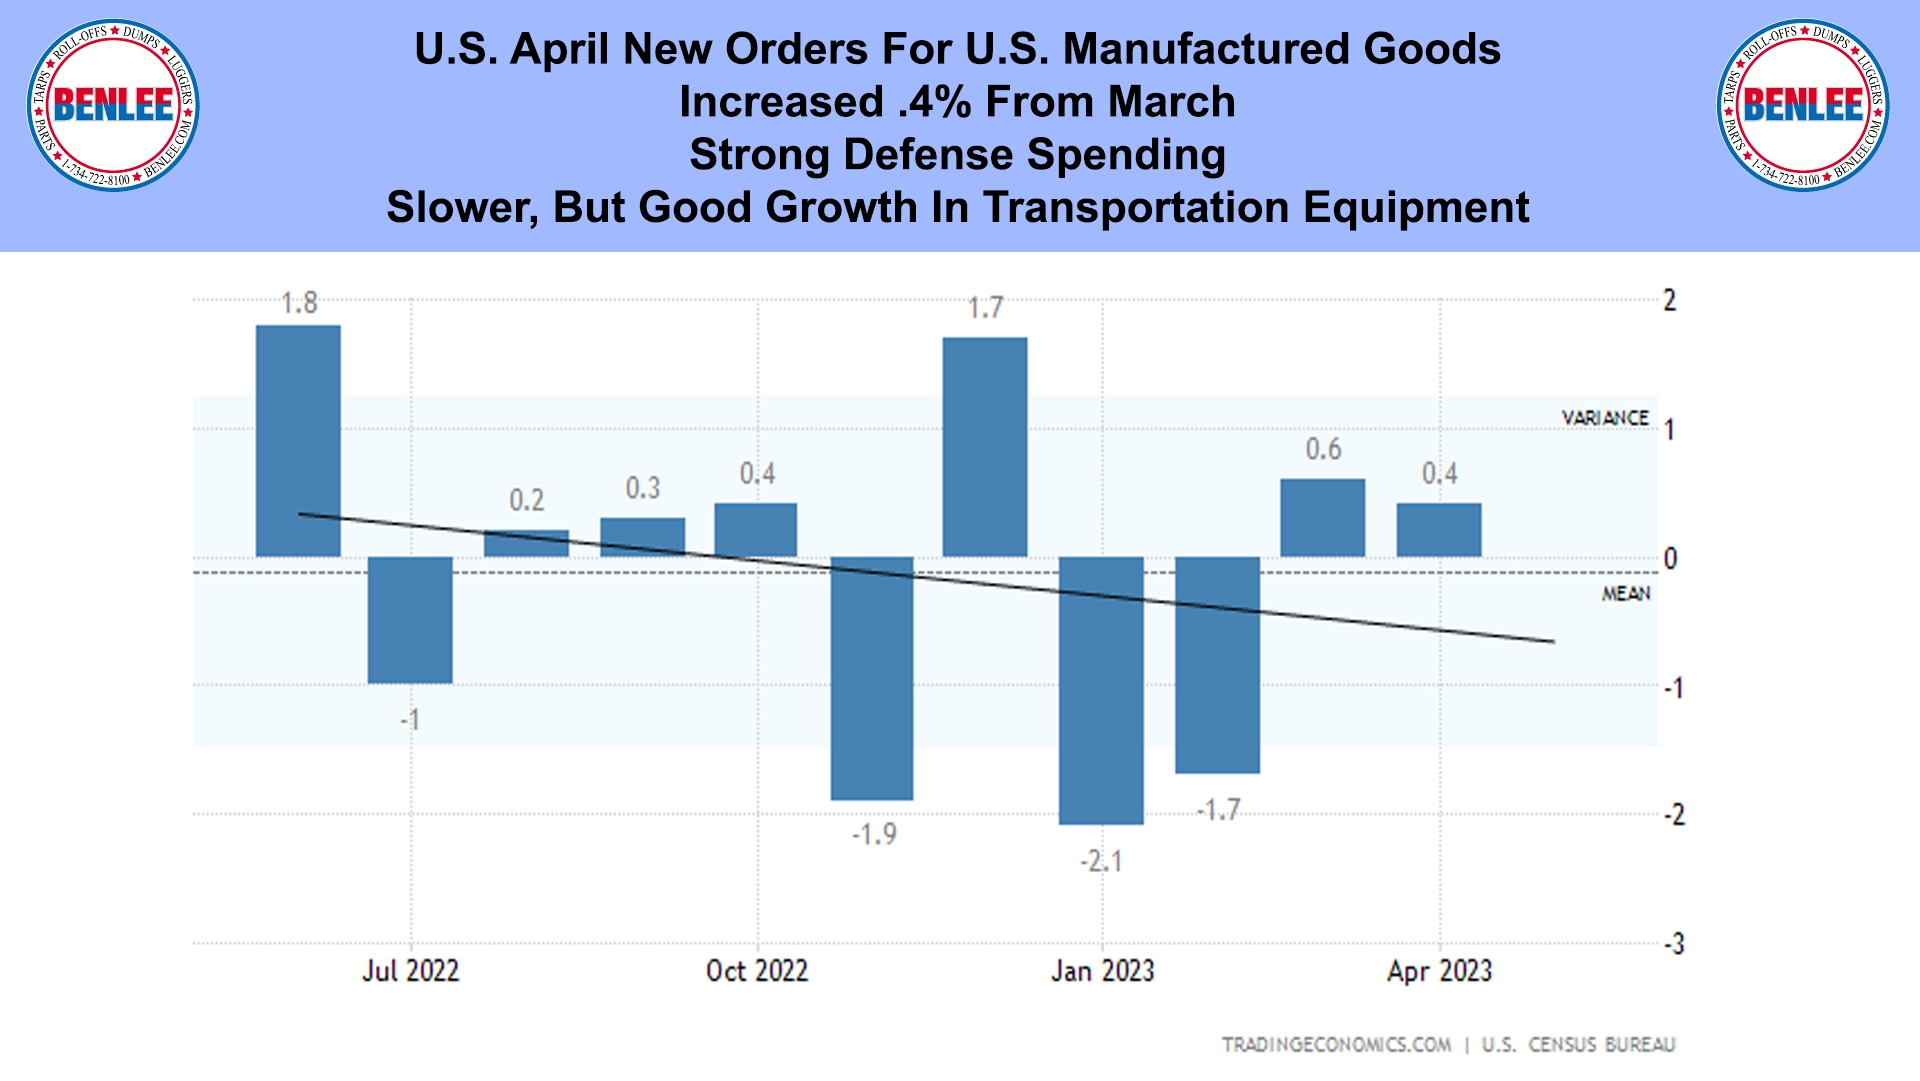 U.S. April New Orders For U.S. Manufactured Goods